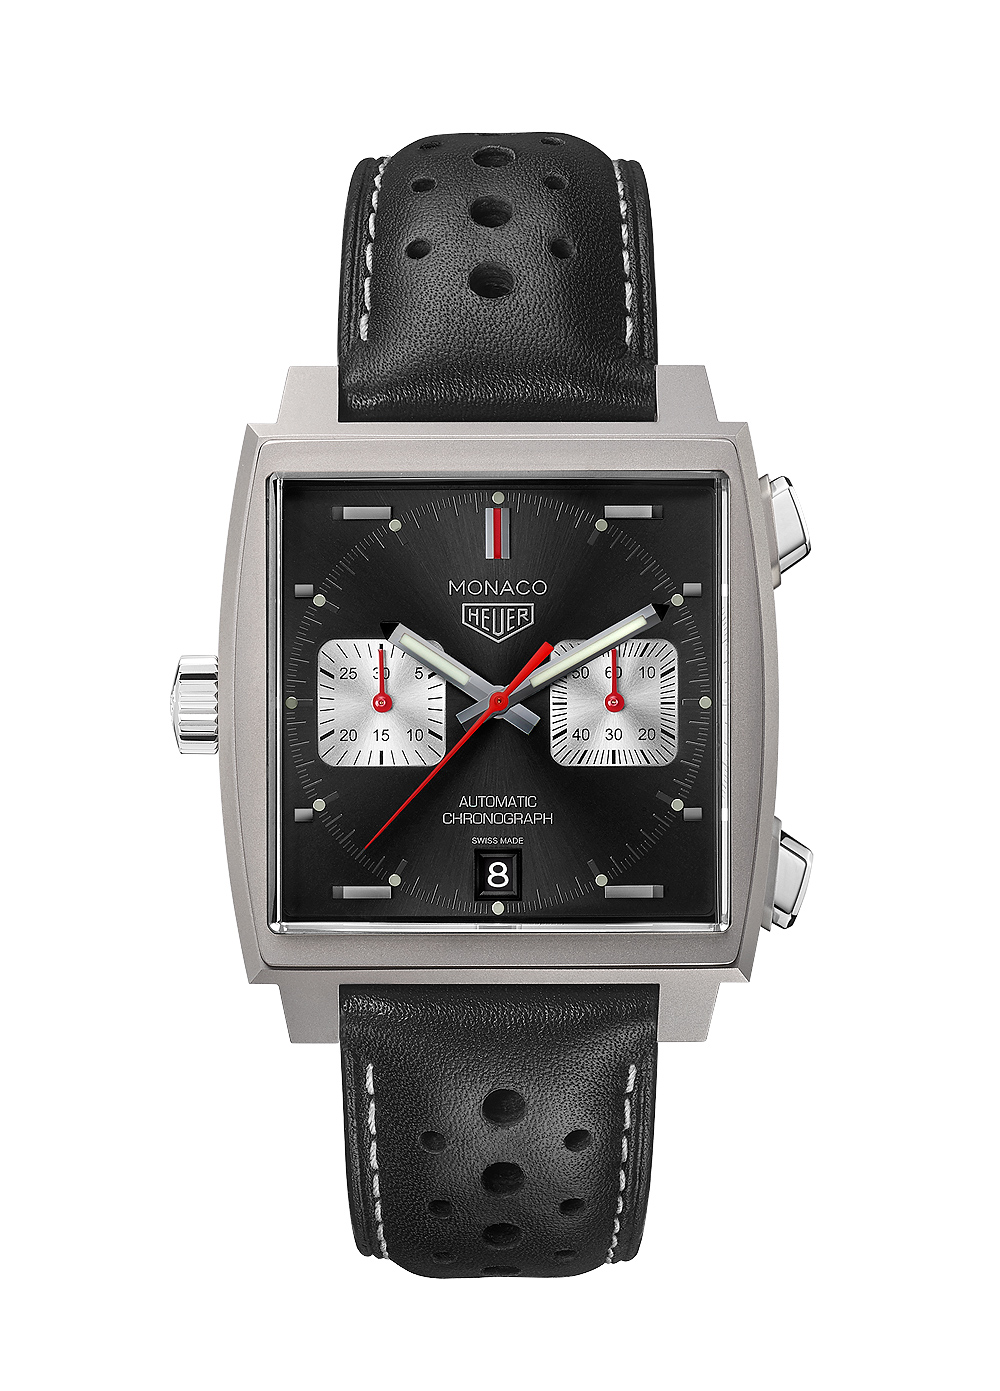 Full set of 50th anniversary TAG Heuer Monaco watches appears at